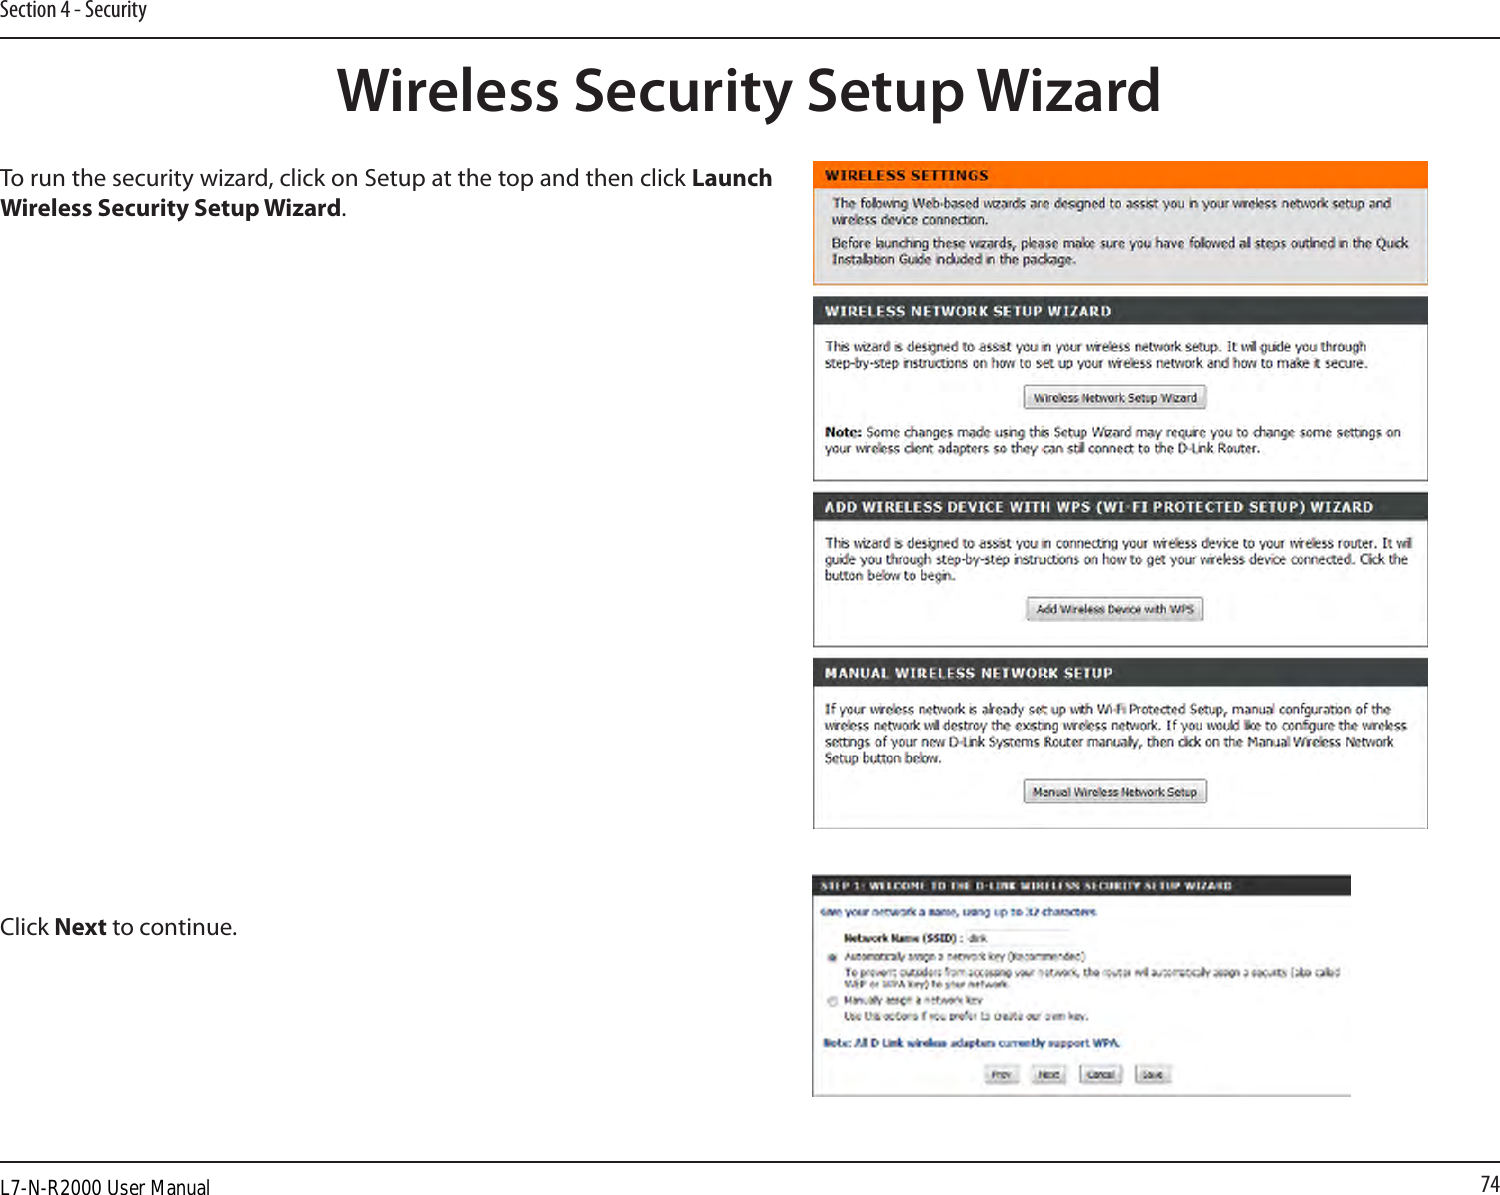 74Section 4 - SecurityWireless Security Setup WizardTo run the security wizard, click on Setup at the top and then click Launch Wireless Security Setup Wizard.Click Next to continue.L7-N-R2000 User Manual